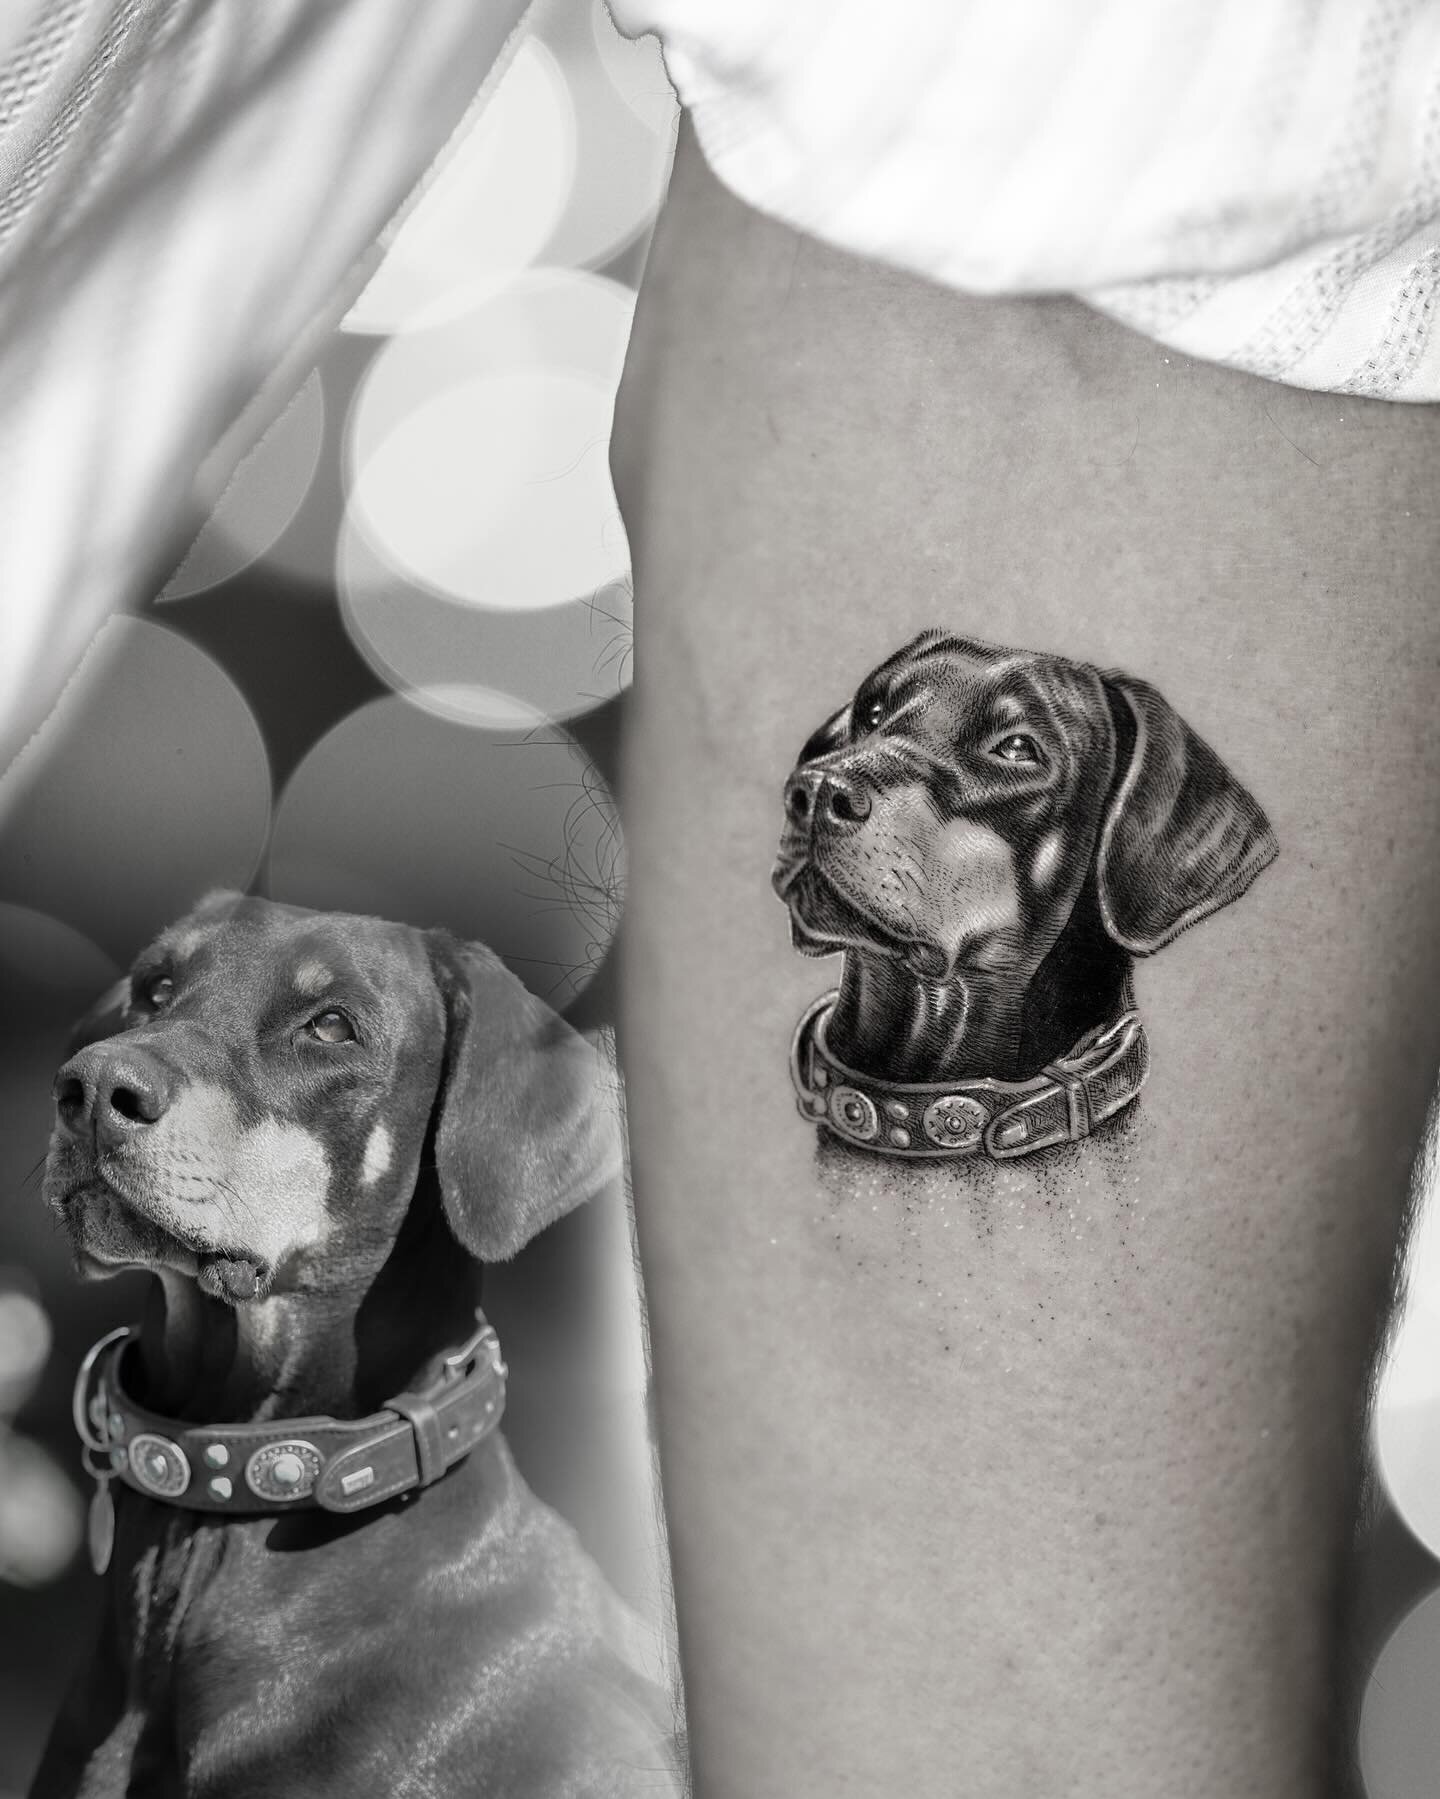 I surprised my dad with a tattoo appointment - Our baby-dog, Ombra. 🐶🩶

Ombra (that means Shadow in Italian), is our family dog. I did this for my dad&rsquo;s on 60th birthday. It was his first tattoo. 🎉

He did not know about the appointments I s